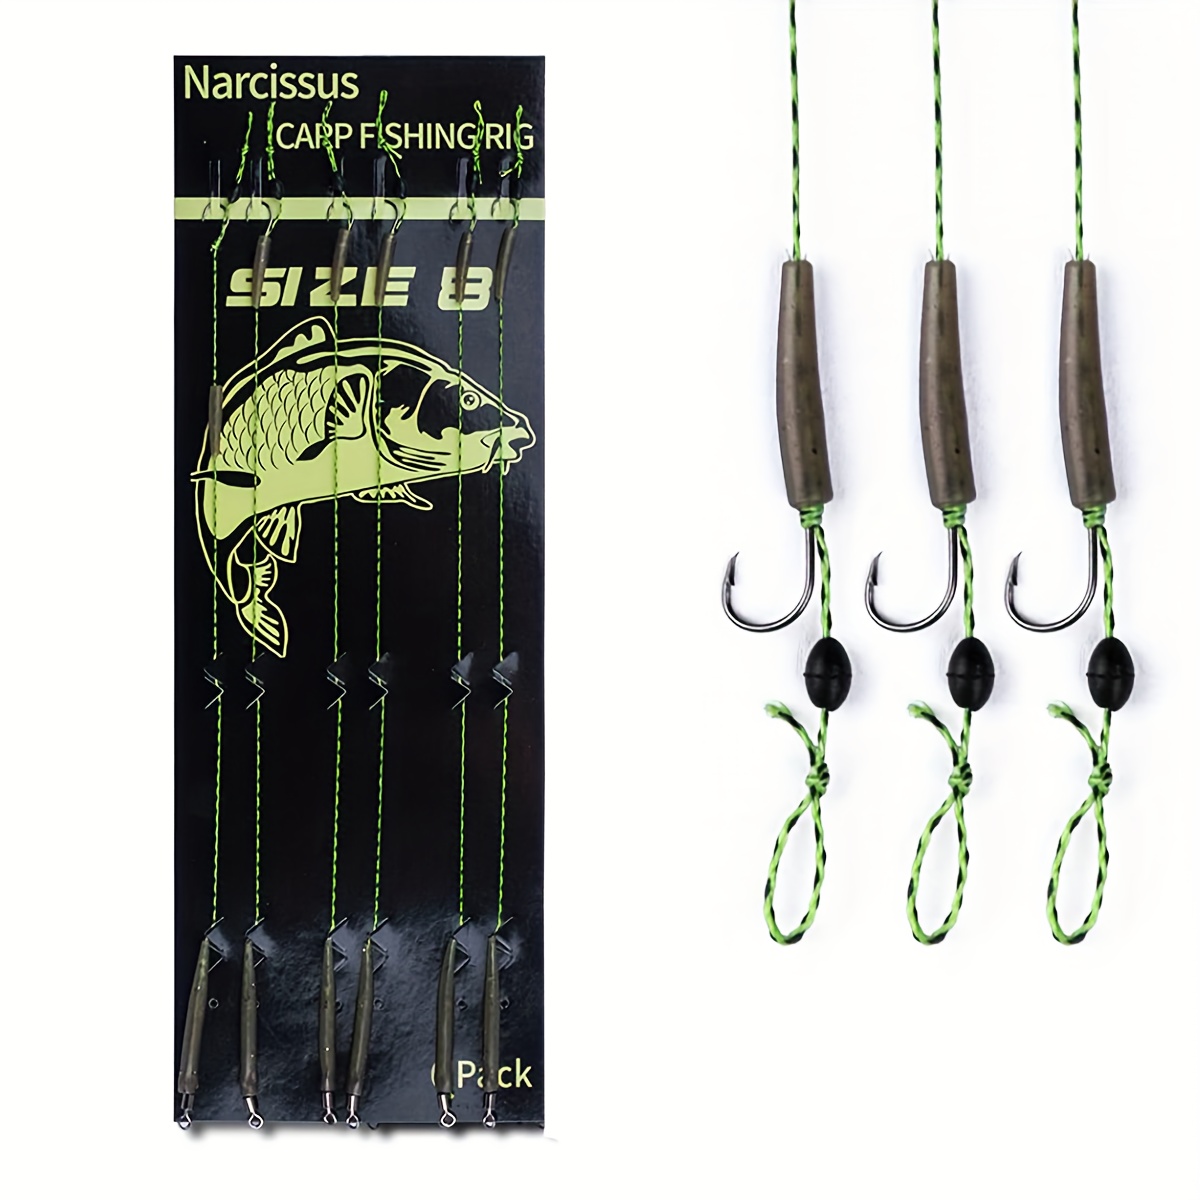 Ready Made Barbed Biodegradable Fishing Hooks With Braided Line Tied Rigs  Ideal For Carp Fishing Tackle And Feeder Leader From Bai07, $10.49